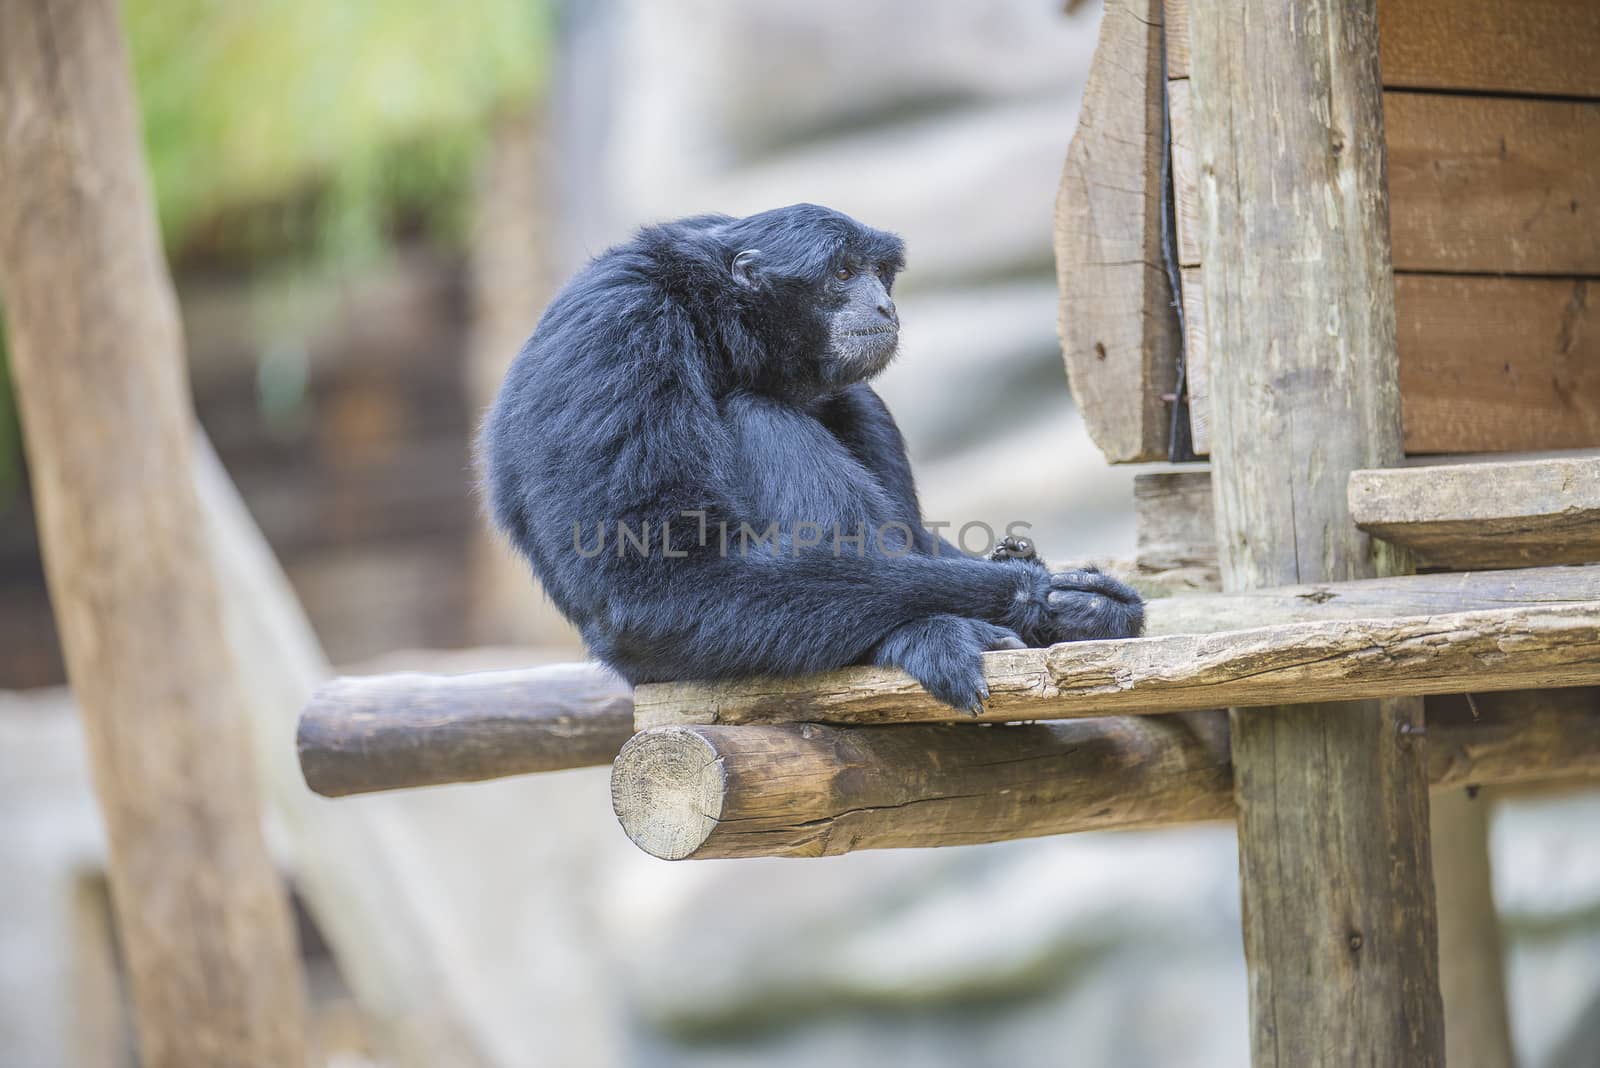 Chimpanzees are members of the Hominidae family, along with gorillas, humans, and orangutans. Photo is shot 27/07/2013.